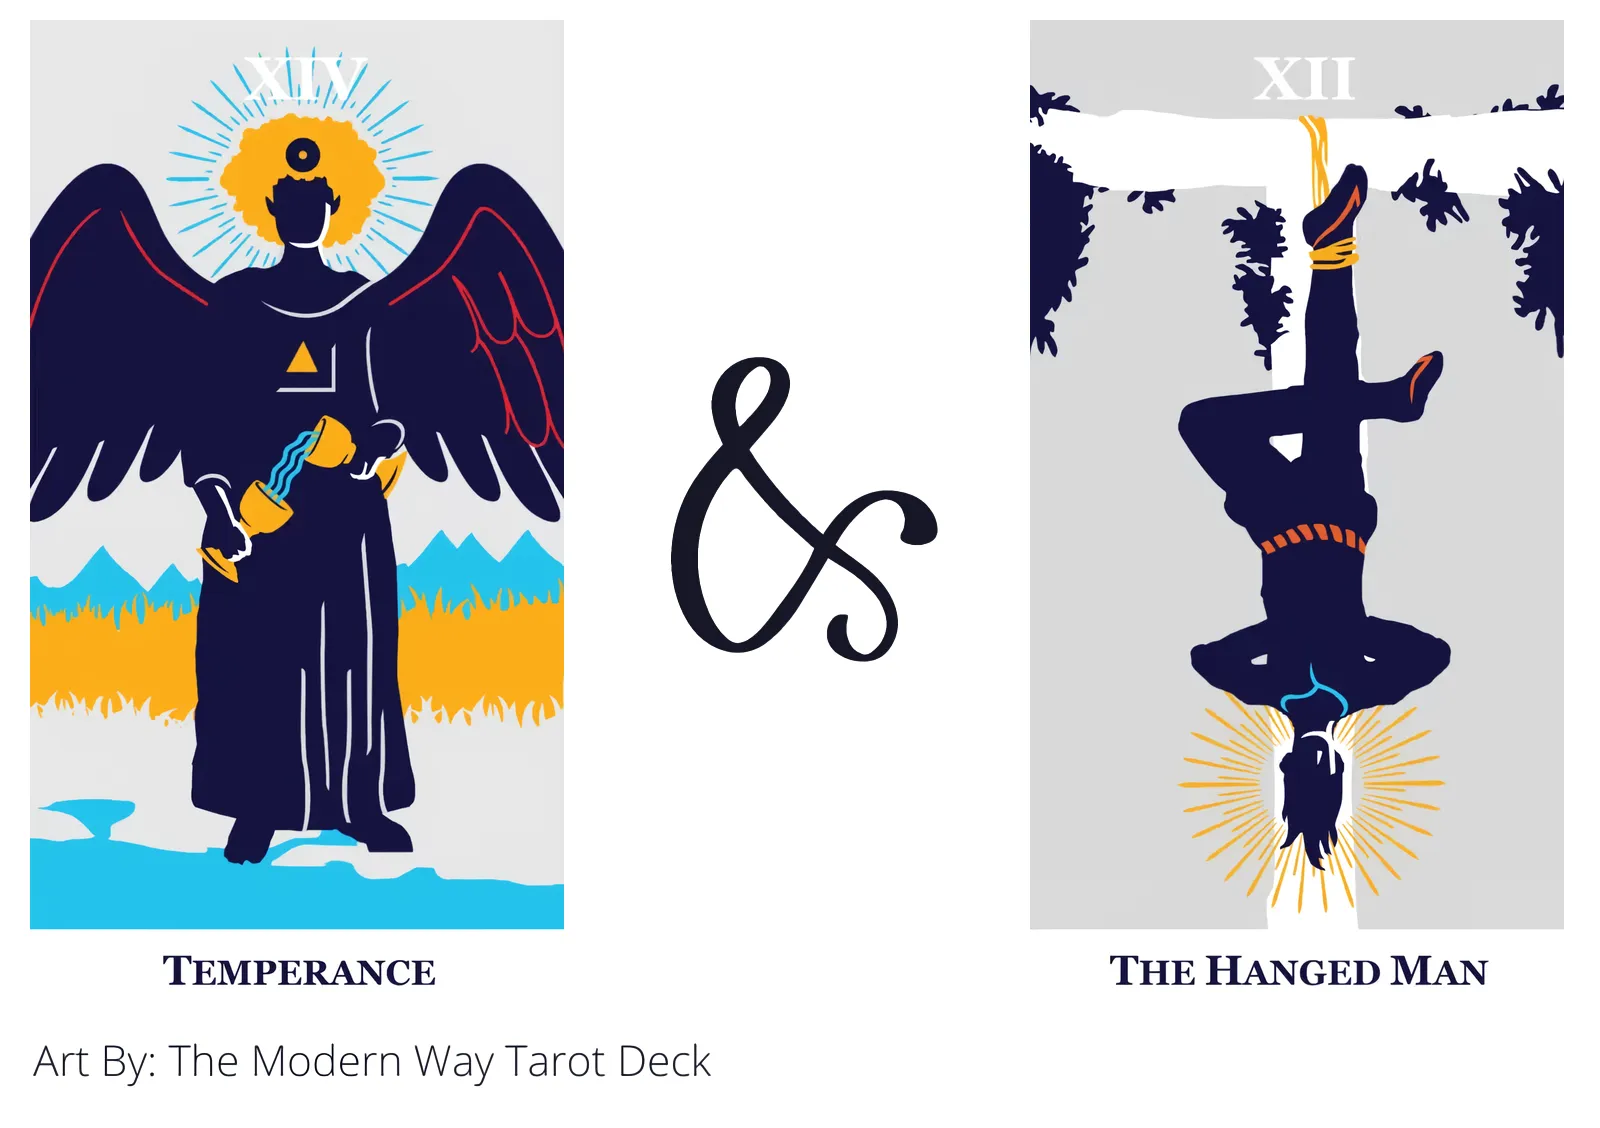 temperance and the hanged man tarot cards together